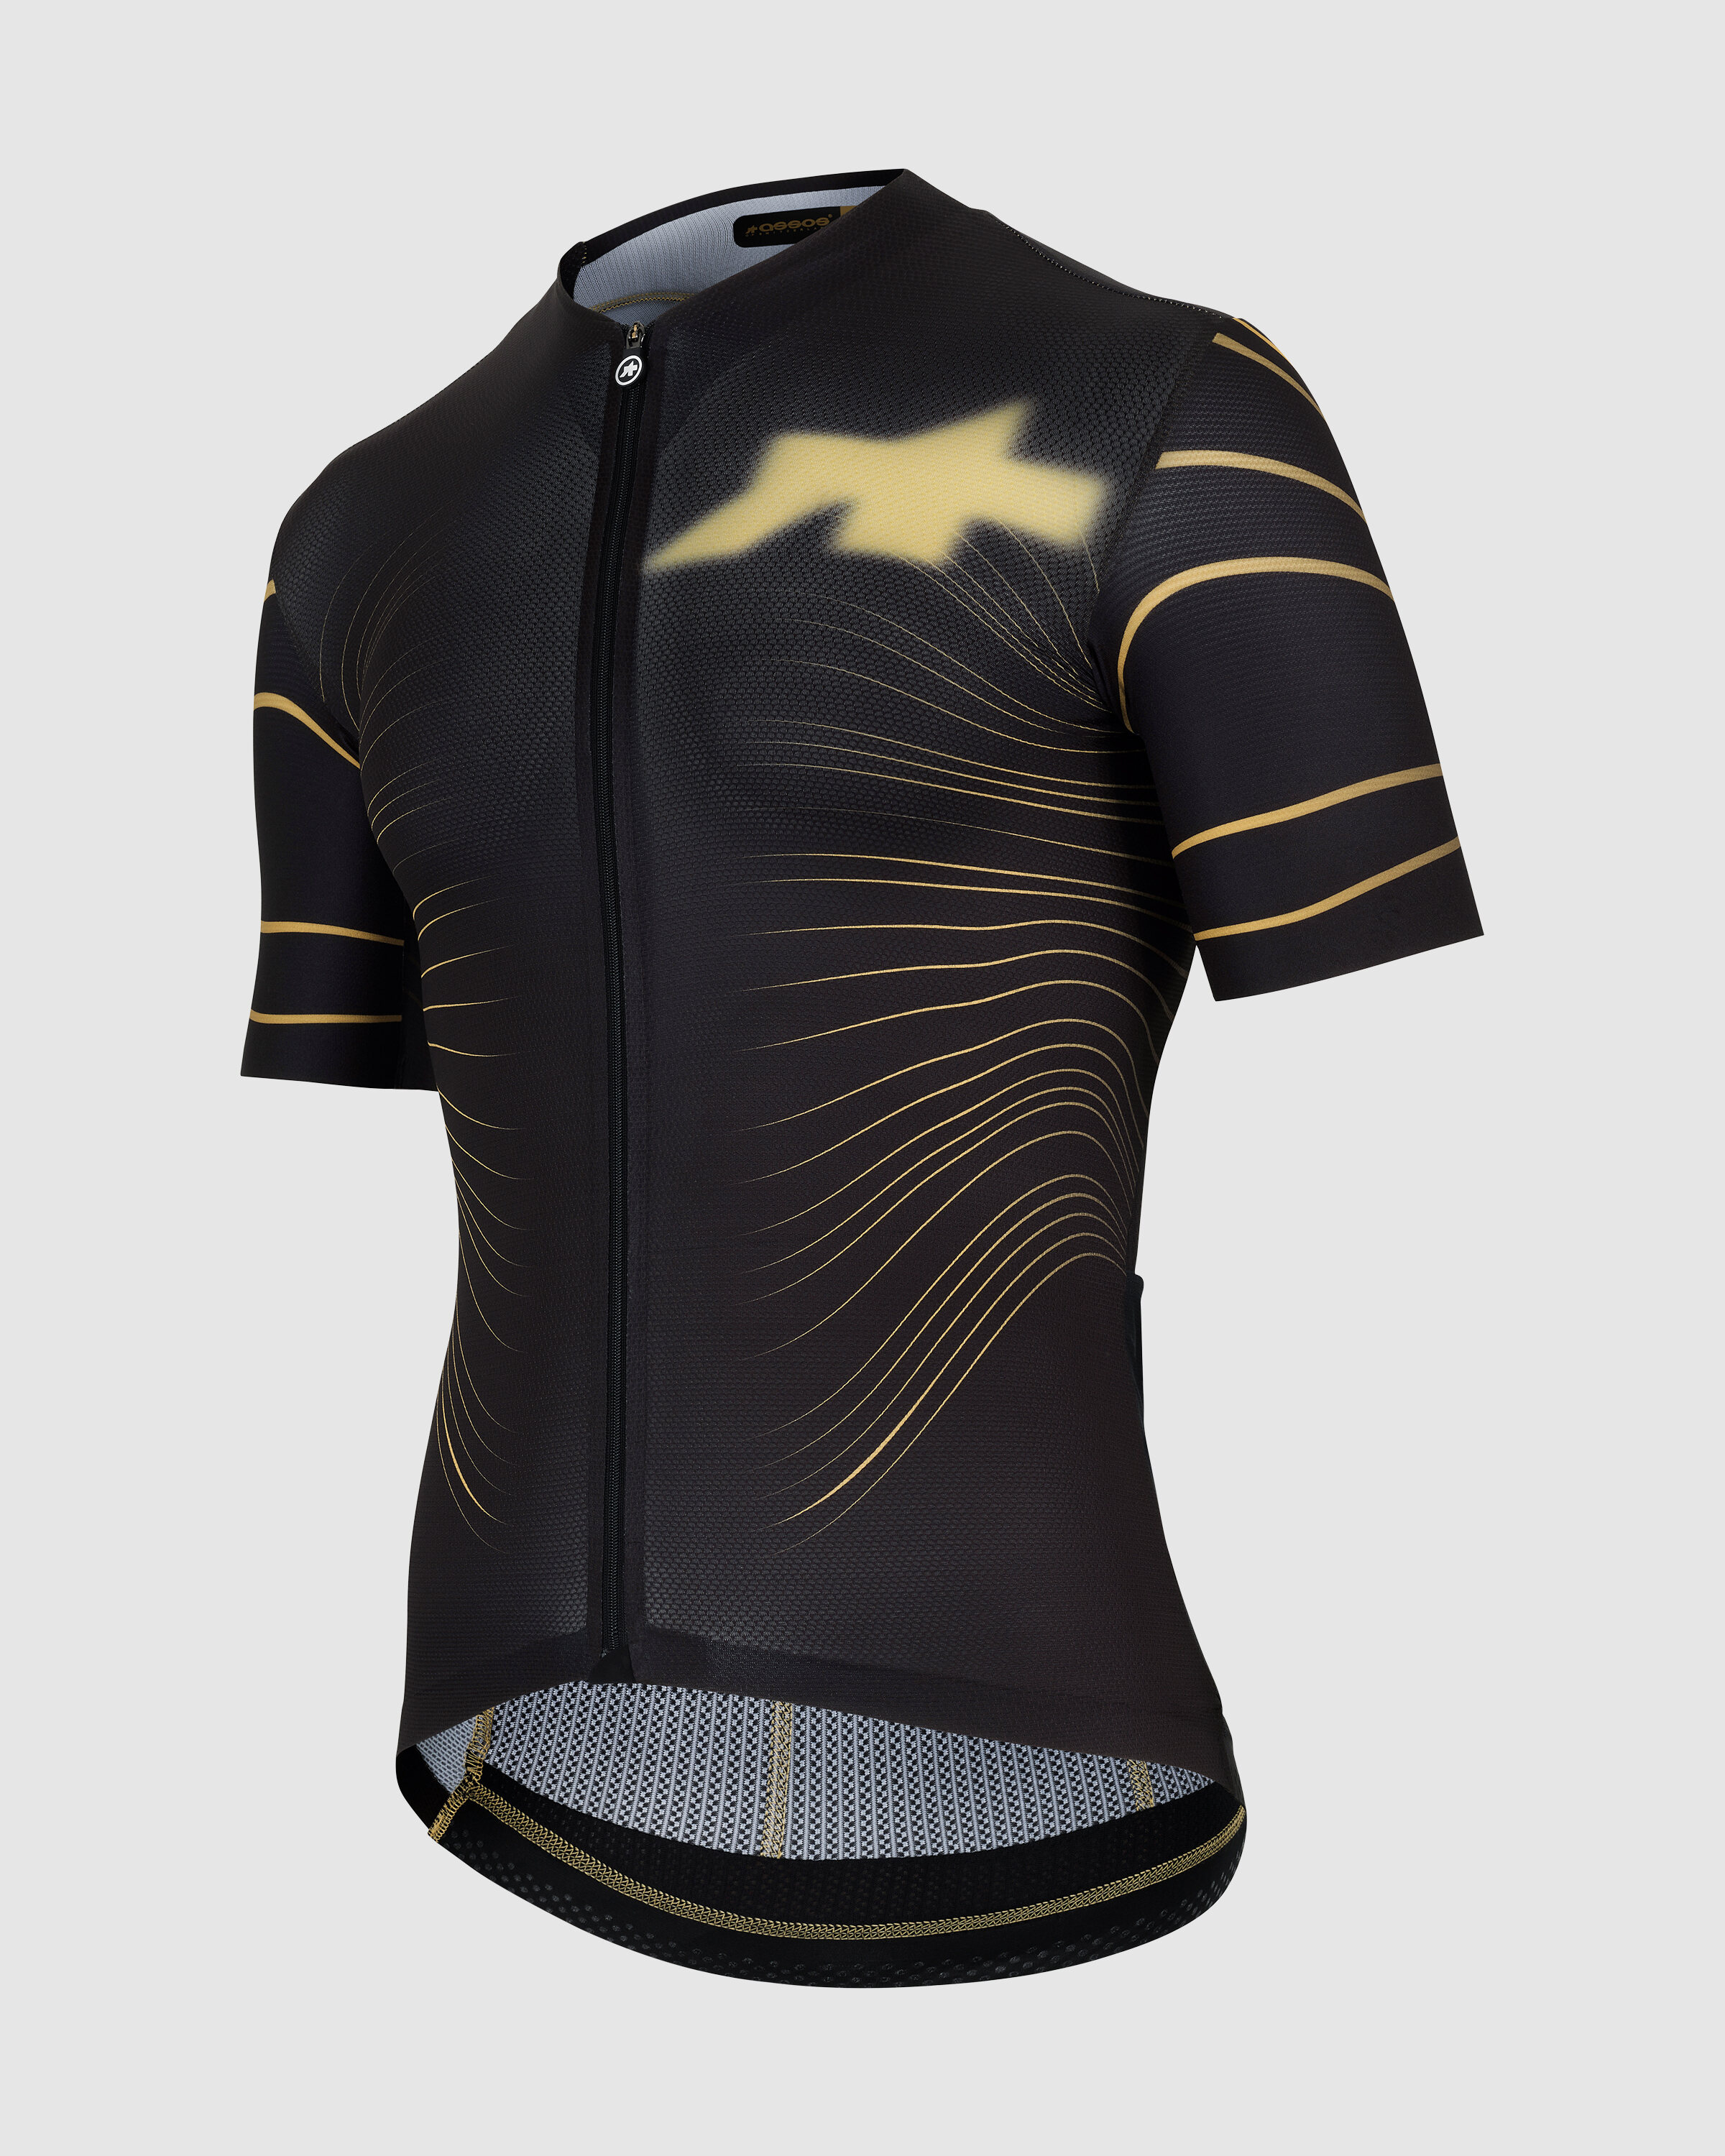 EQUIPE RS JERSEY S9 TARGA – WINGS OF SPEED - ASSOS Of Switzerland - Official Outlet